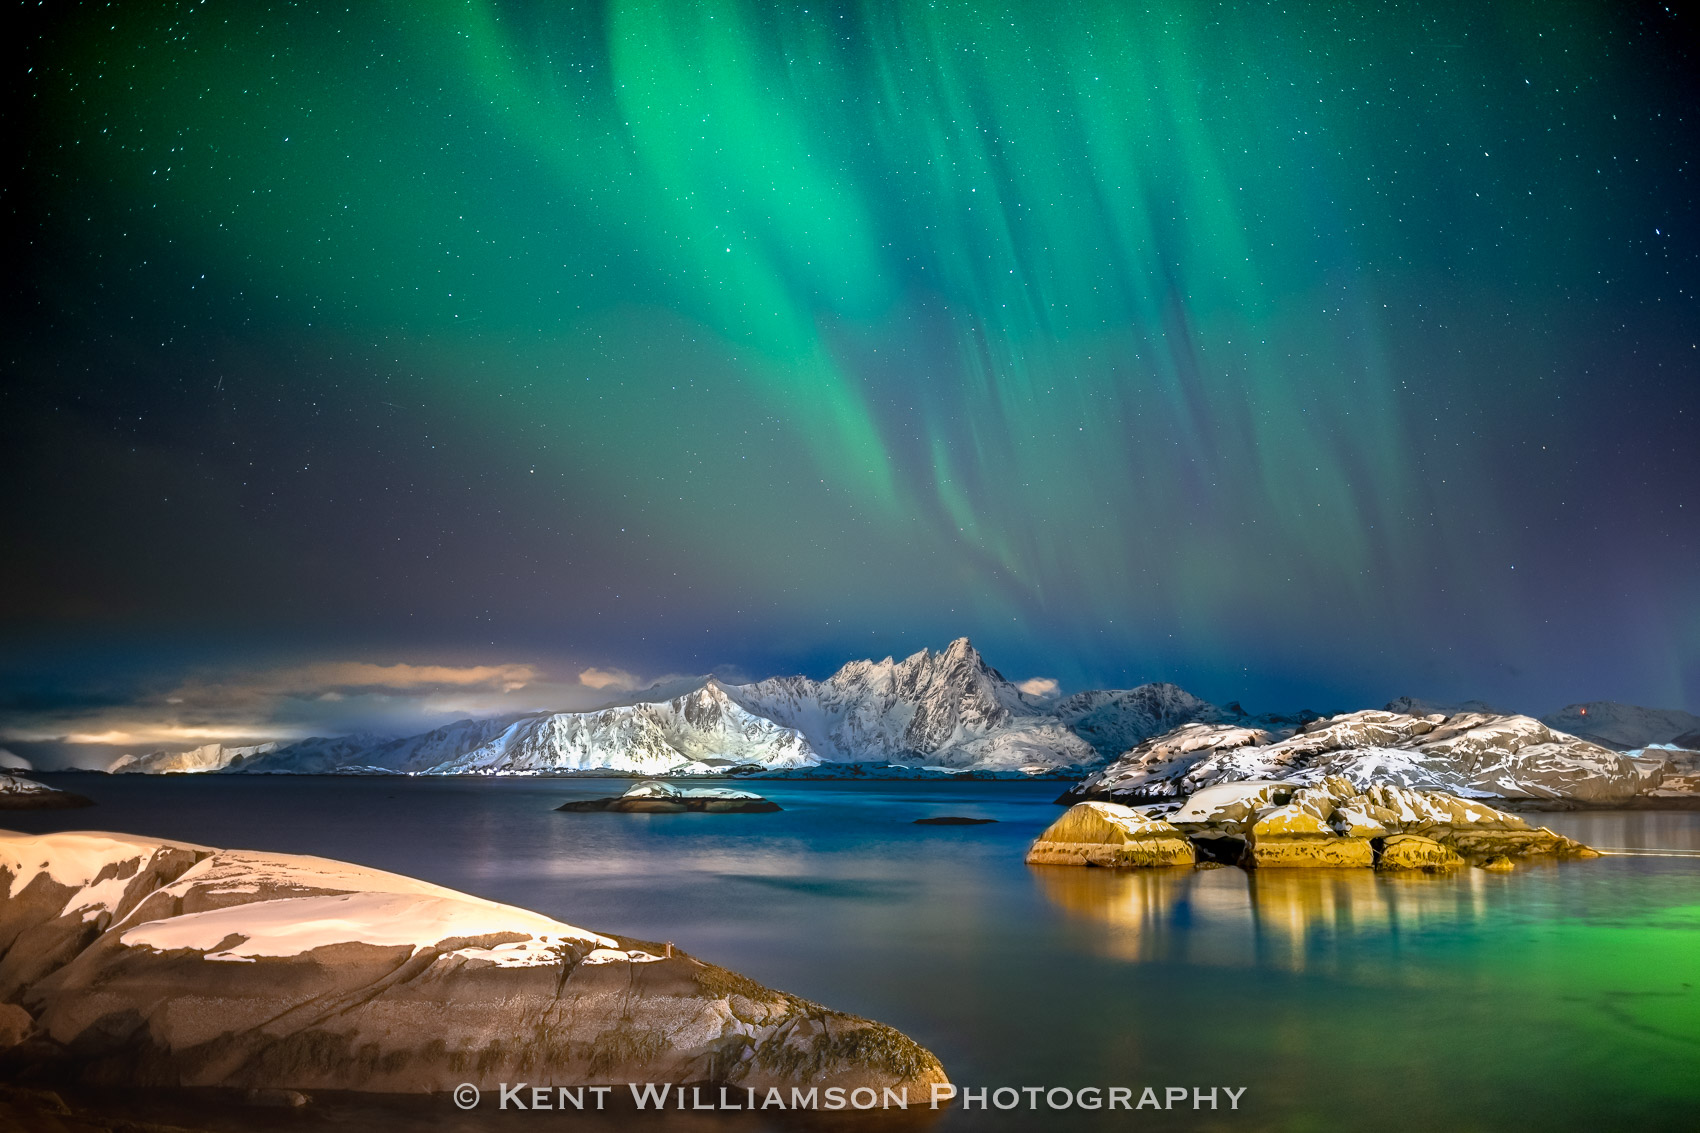 Dancing Northern lights bring the night sky to life over Mortsund, Norway.  This image won the Landscape Photography Contest...